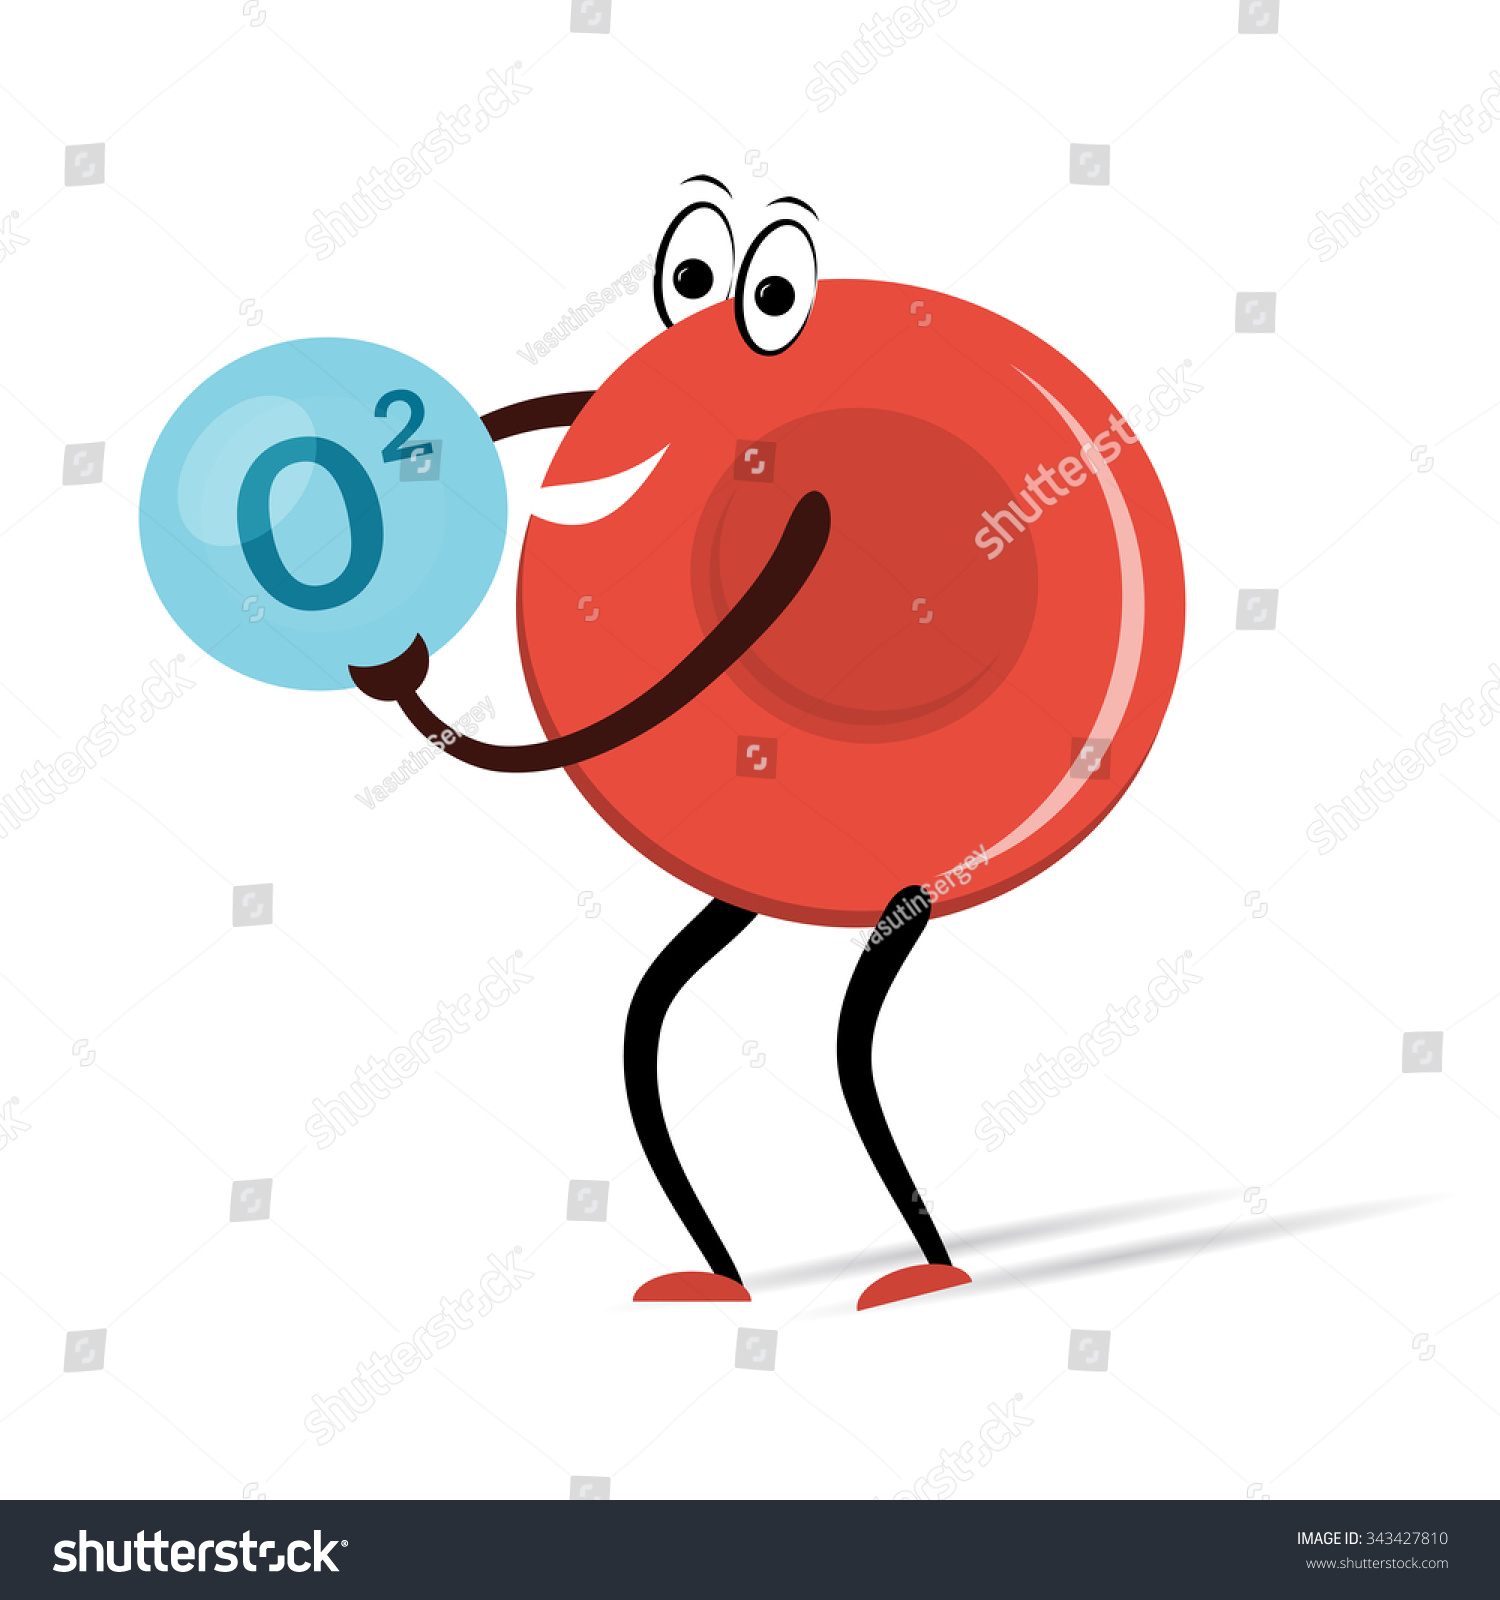 blood animated clipart - photo #44